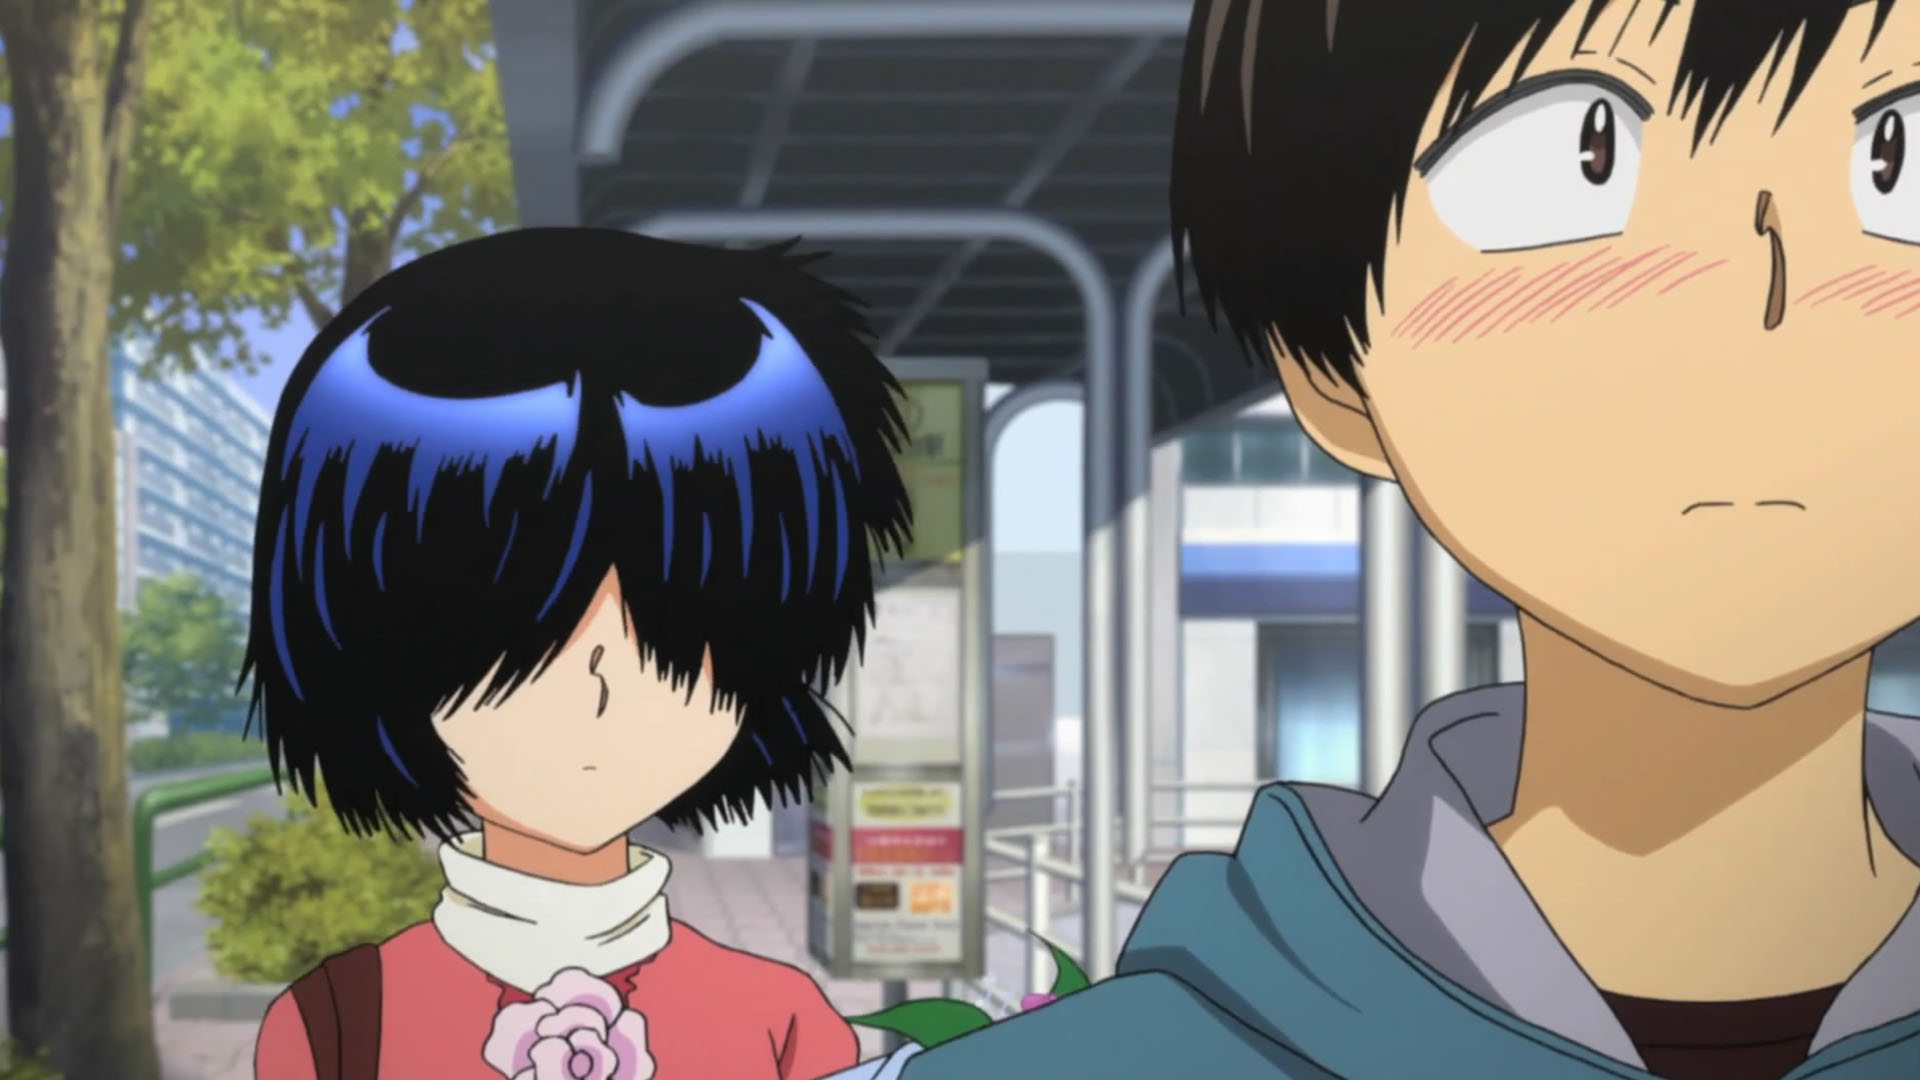 End of the Drool – Mysterious Girlfriend X Episode 13